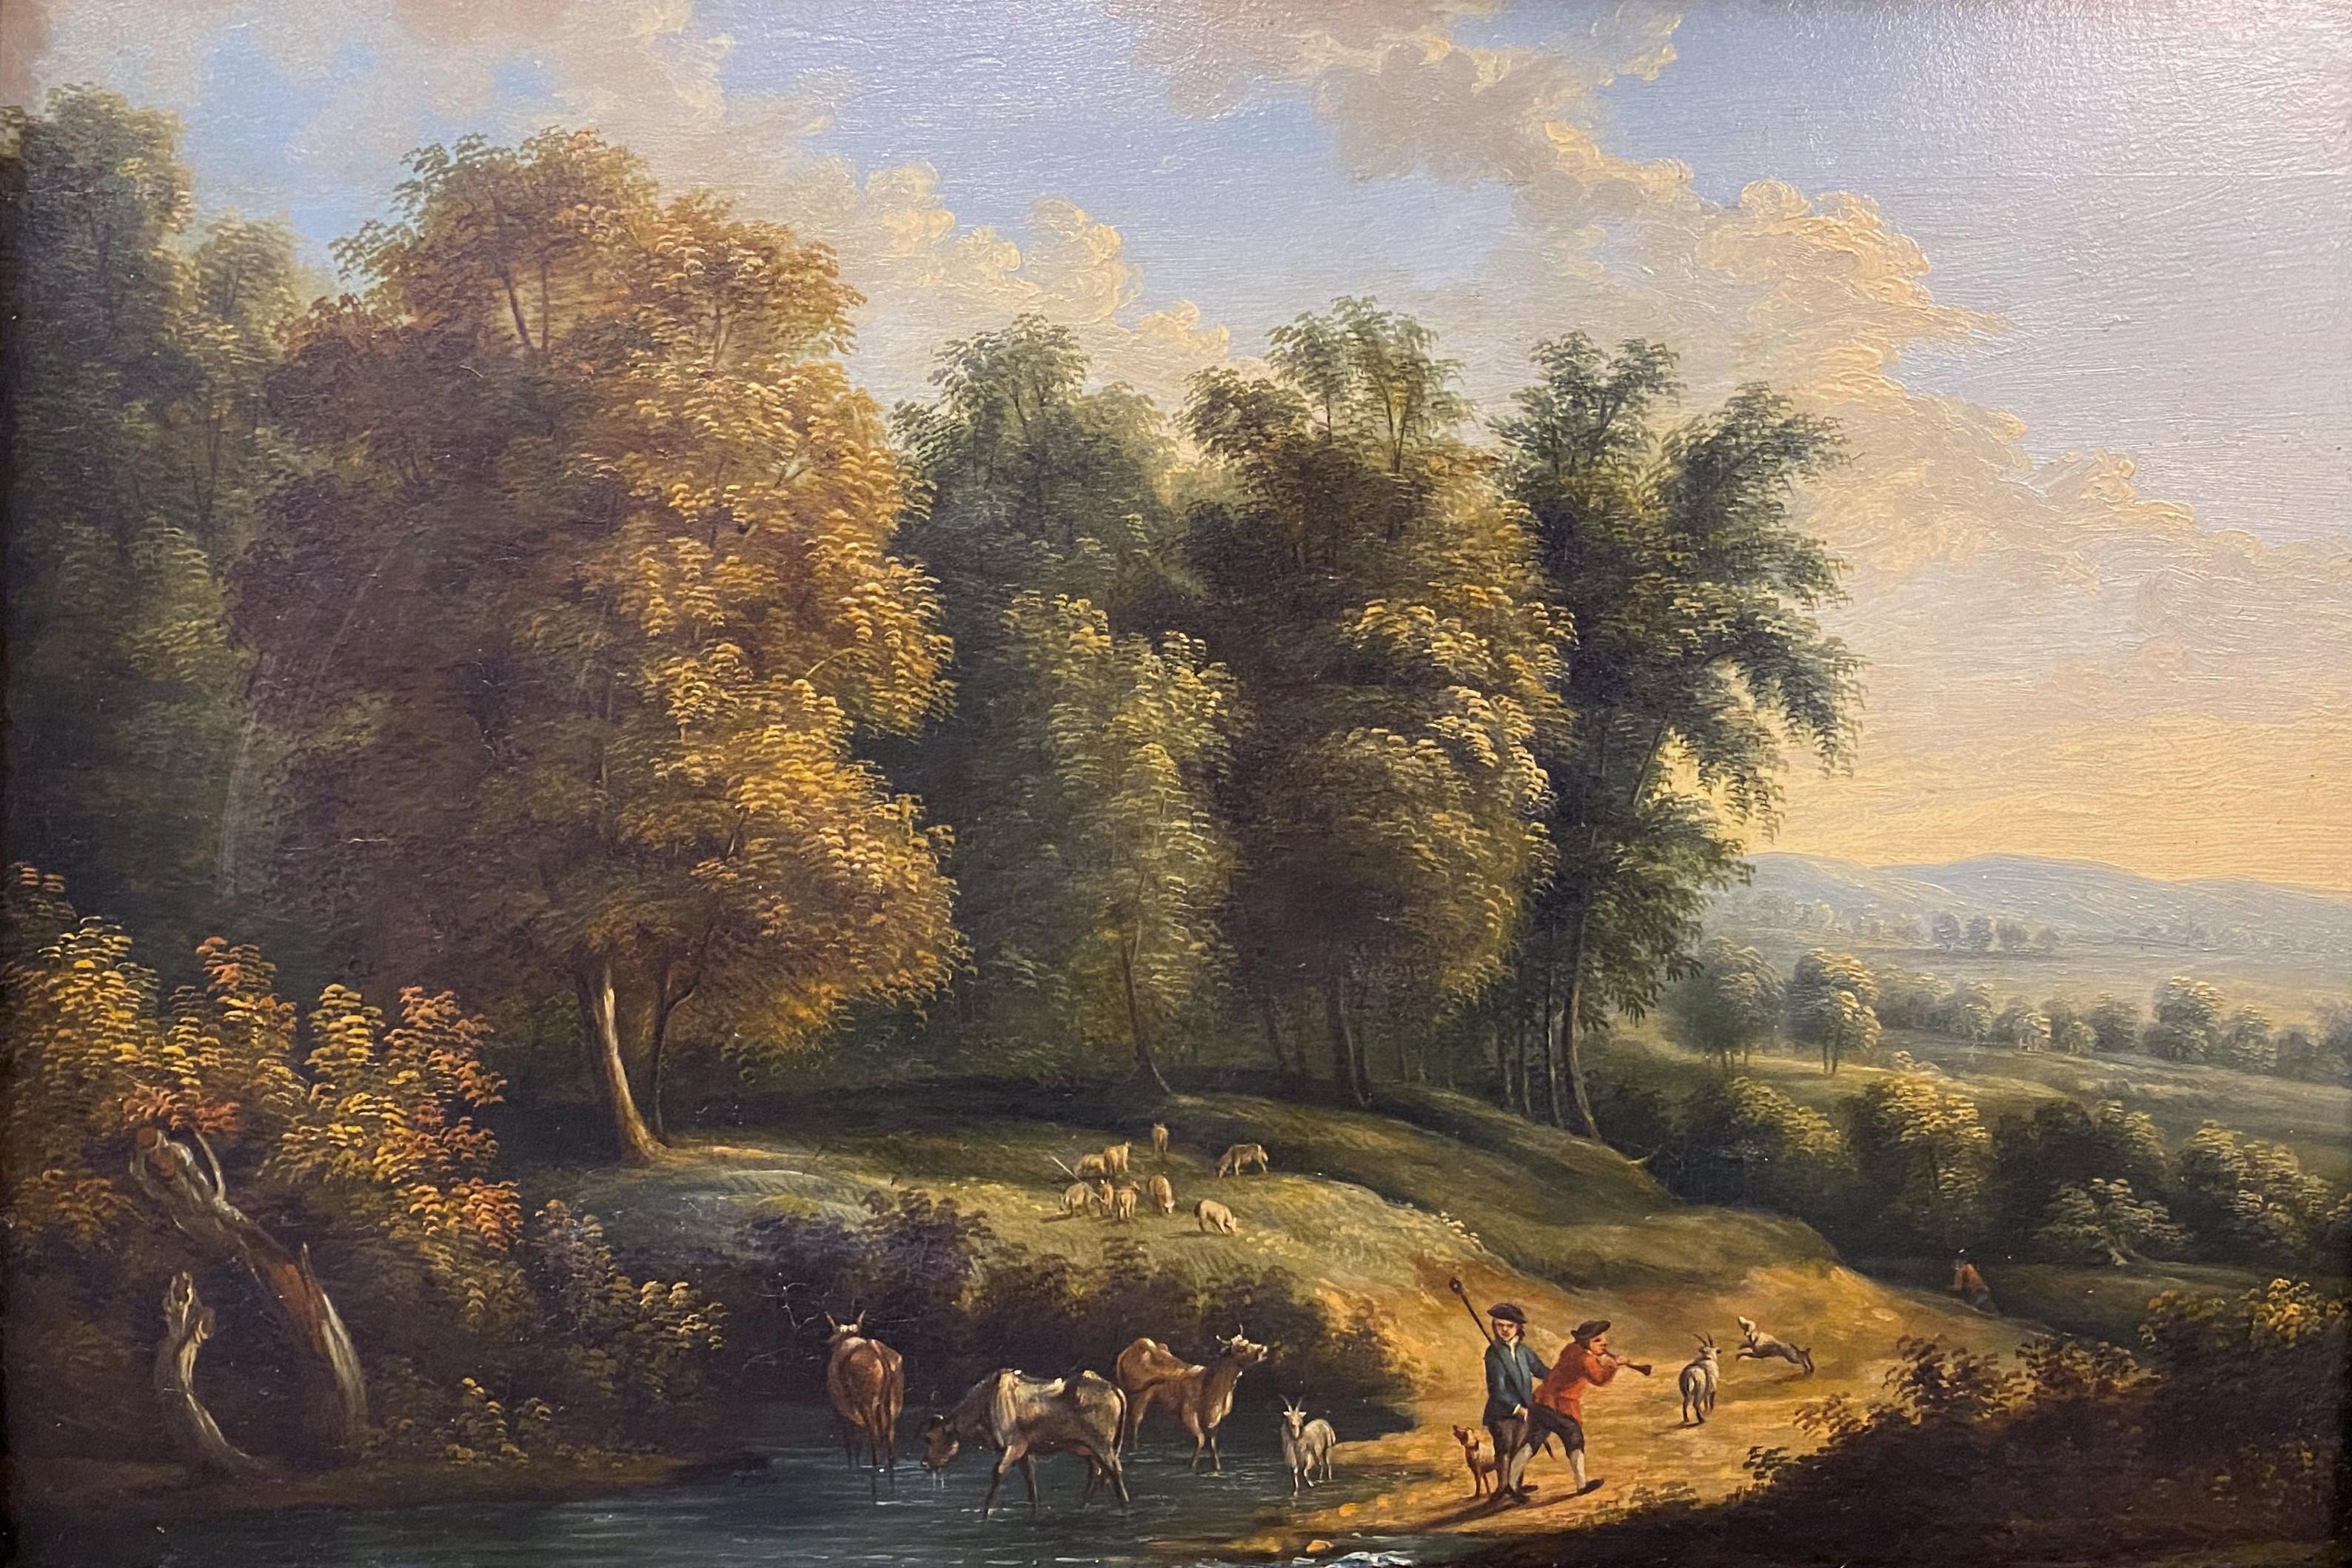 Dutch or Flemish Landscape with Figures & Animals - Painting by Unknown